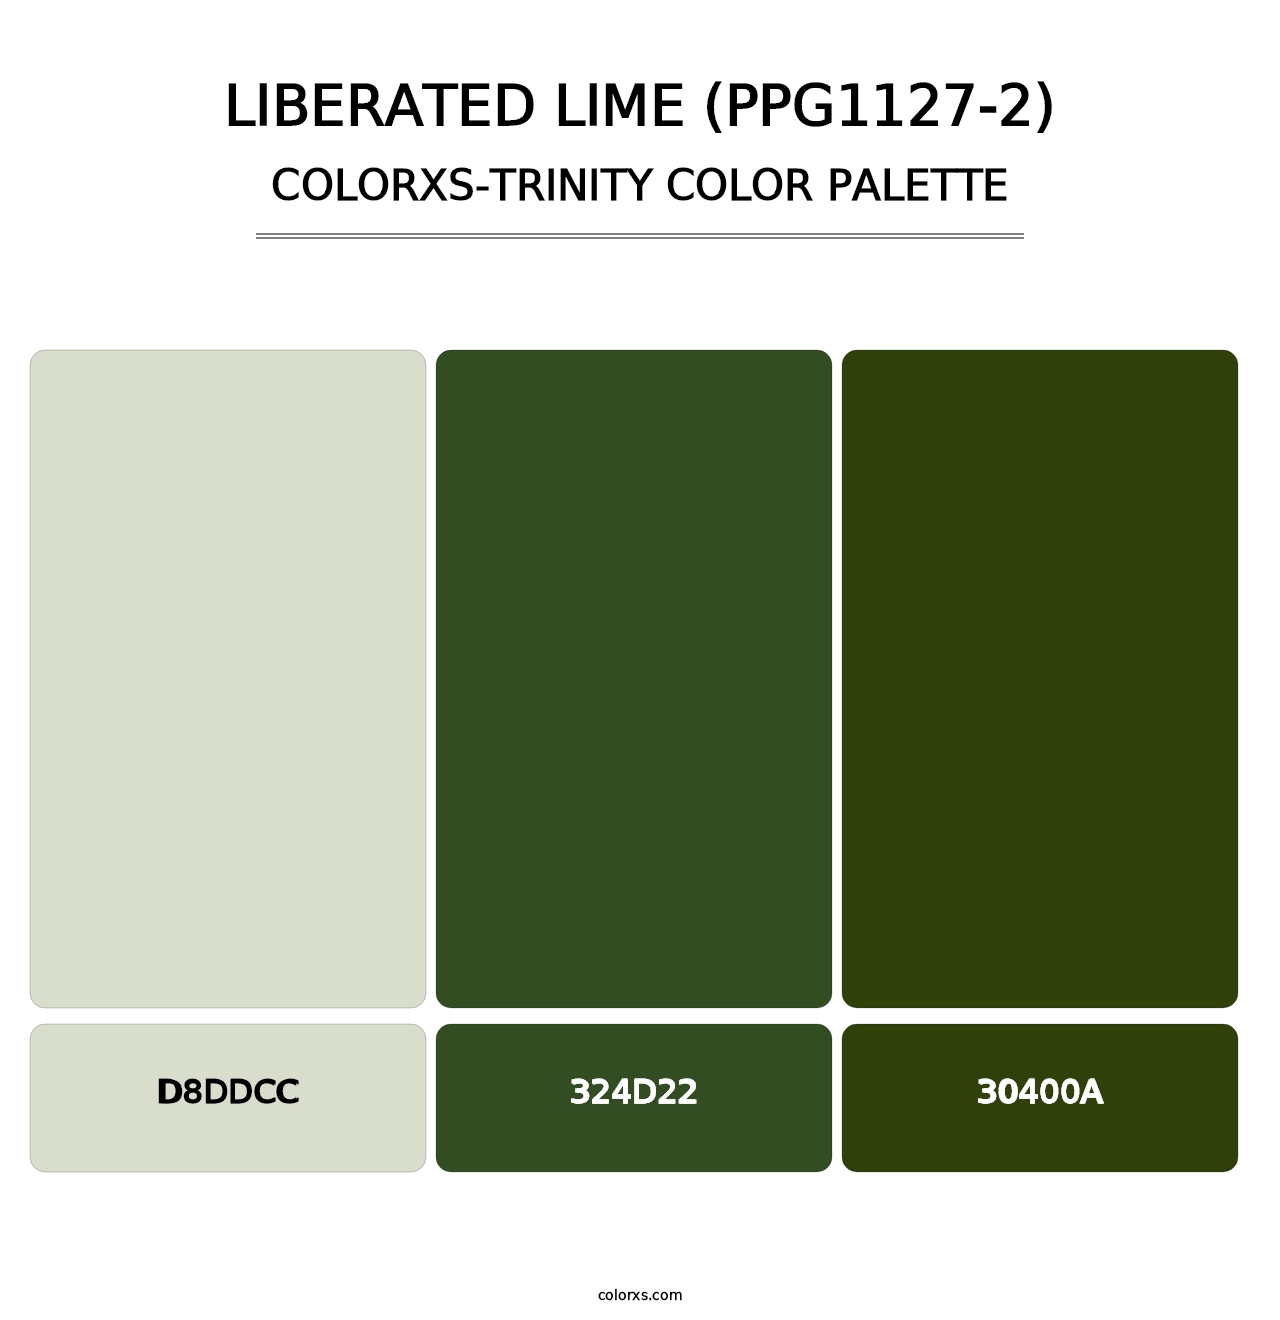 Liberated Lime (PPG1127-2) - Colorxs Trinity Palette